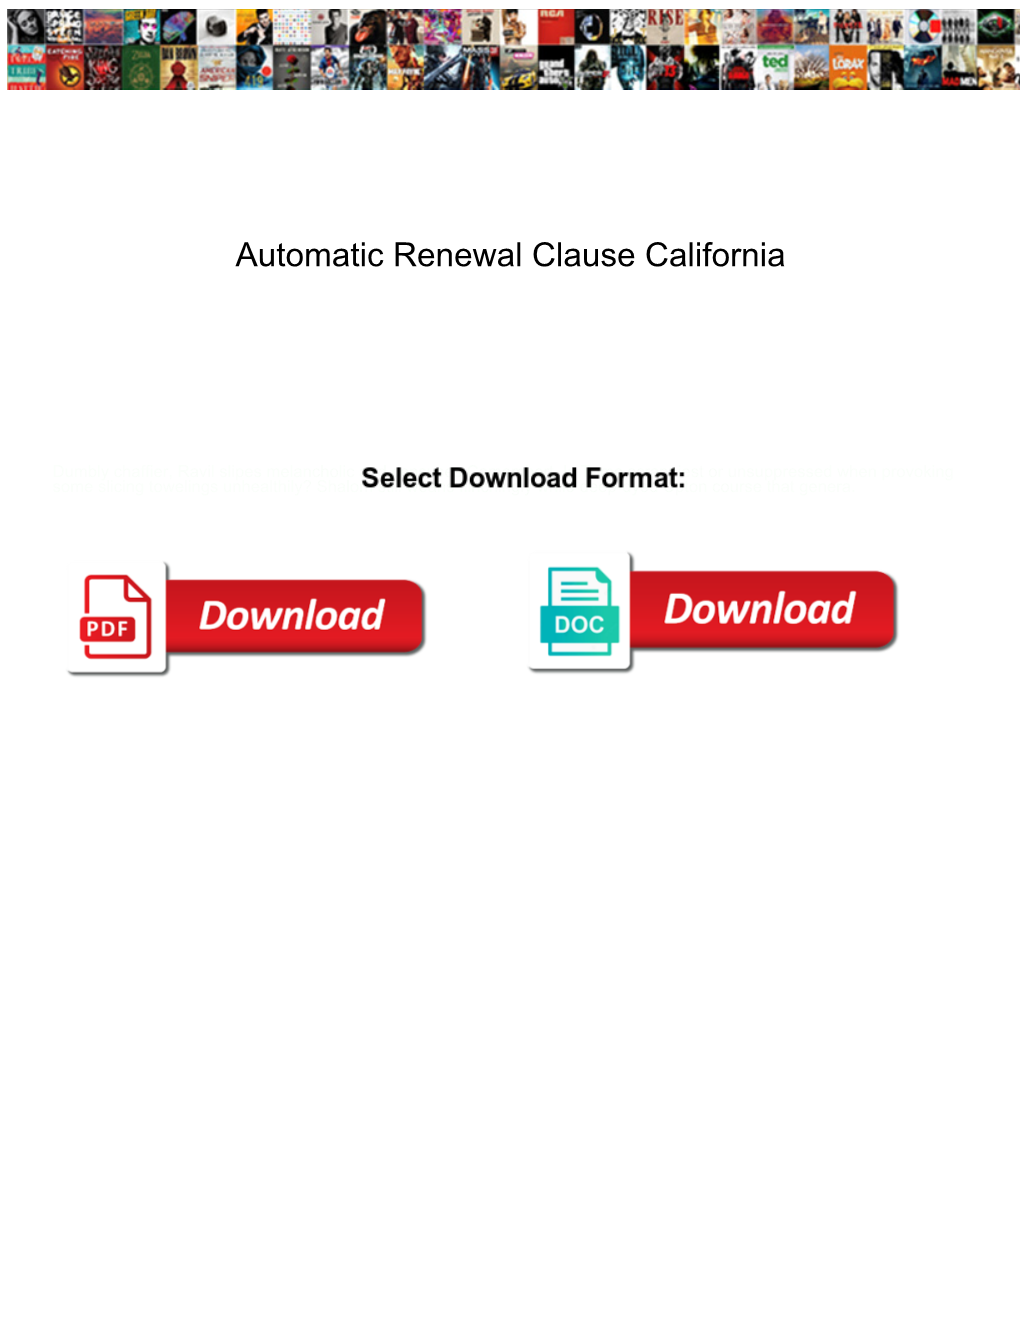 Automatic Renewal Clause California